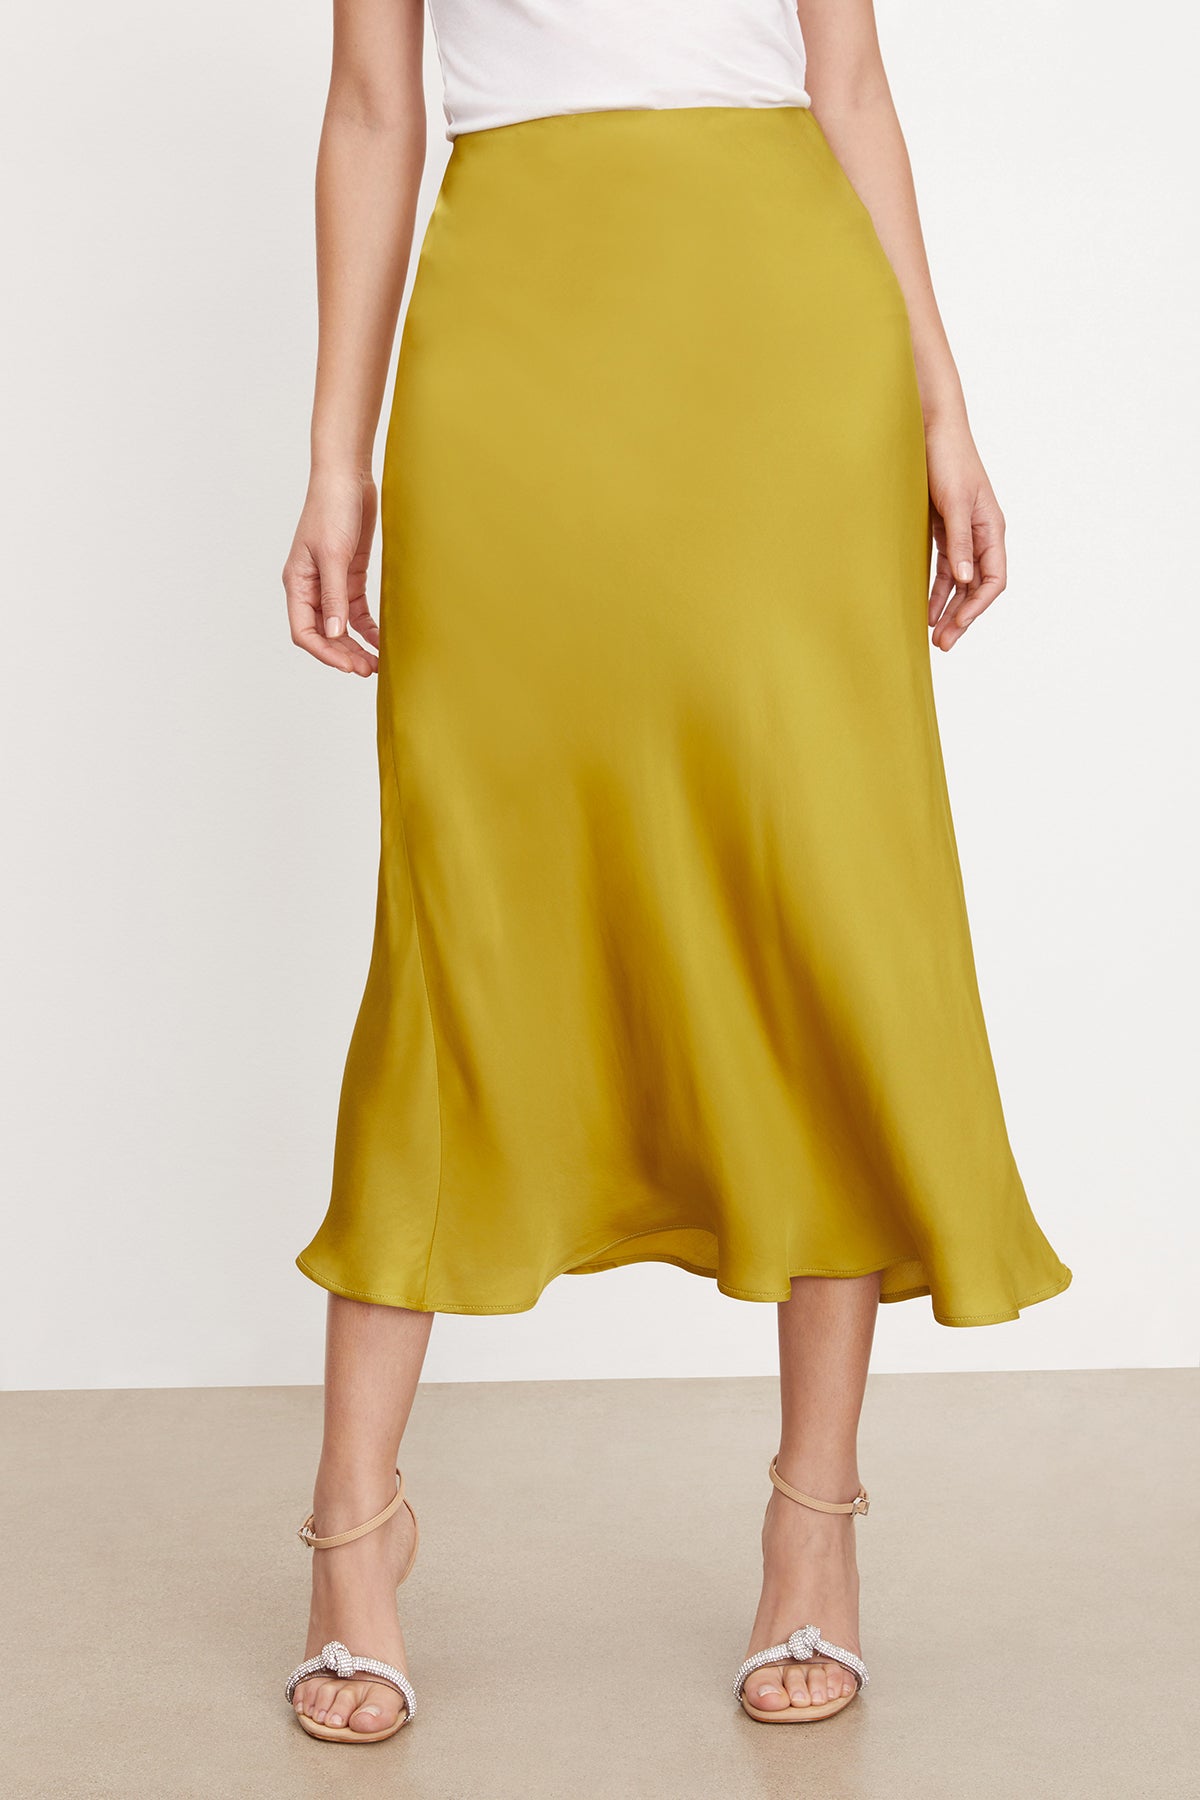 A silhouette of a woman wearing the Velvet by Graham & Spencer Aubree Satin Midi Skirt.-35577742065857